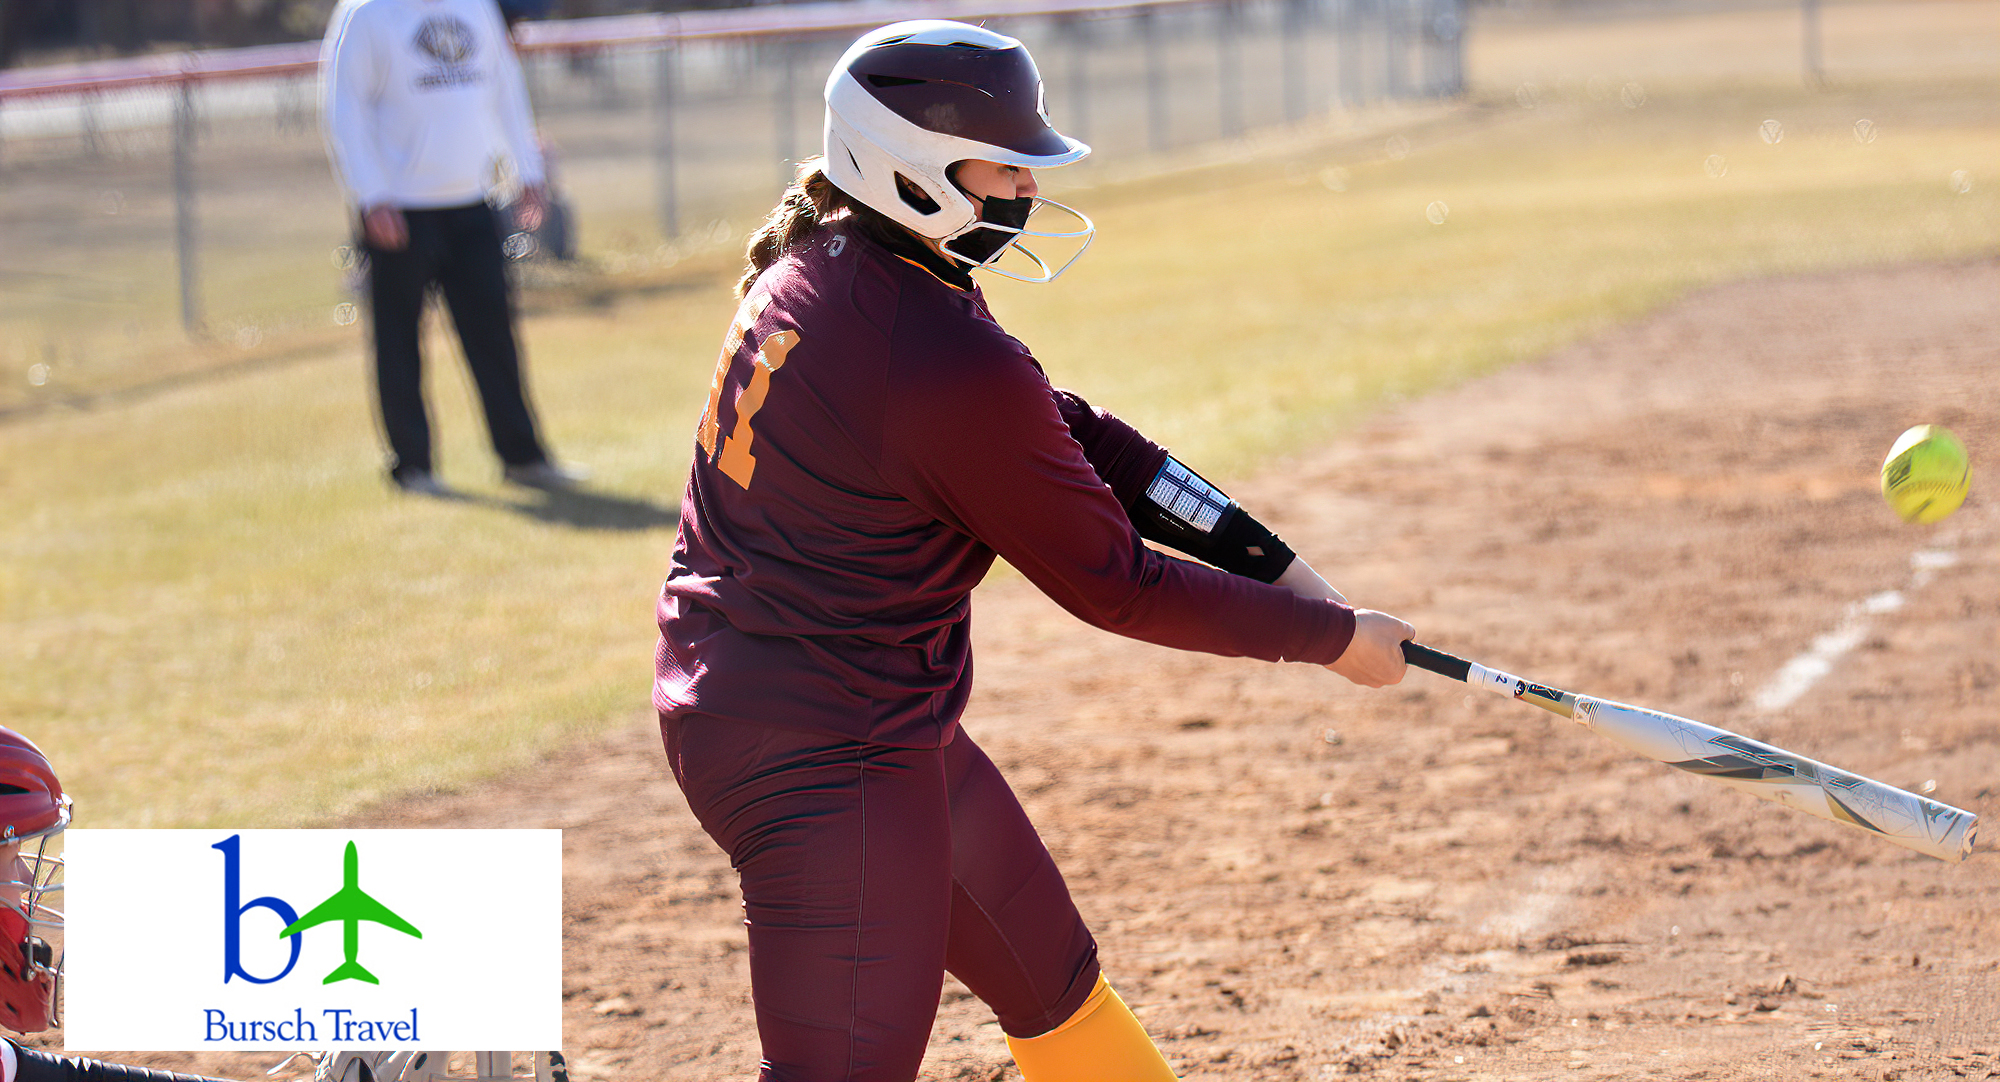 Junior Val Kolstad connects on a pitch and sends it to the left field fence for a double in the Cobbers' 19-10 win over MSU Moorhead in Game 1 of the DH.